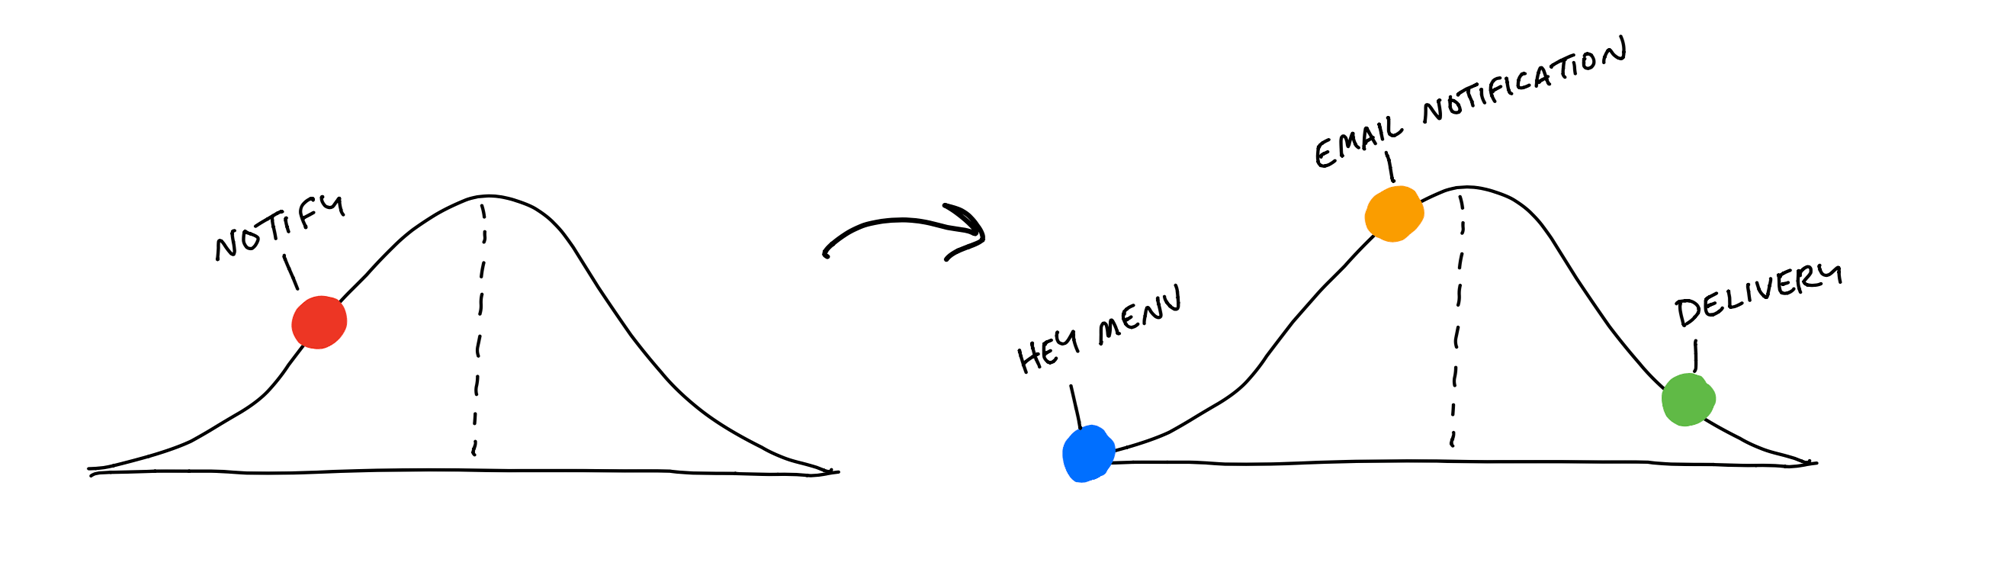 Two hill charts showing the corresponding before and after. Before, a single dot for Notify is stuck on the uphill side. After, three dots appear. One for Hey Menu on the far left, one for Notification Email about to crest the top, and one for Notification Delivery almost all the way to the bottom on the right.